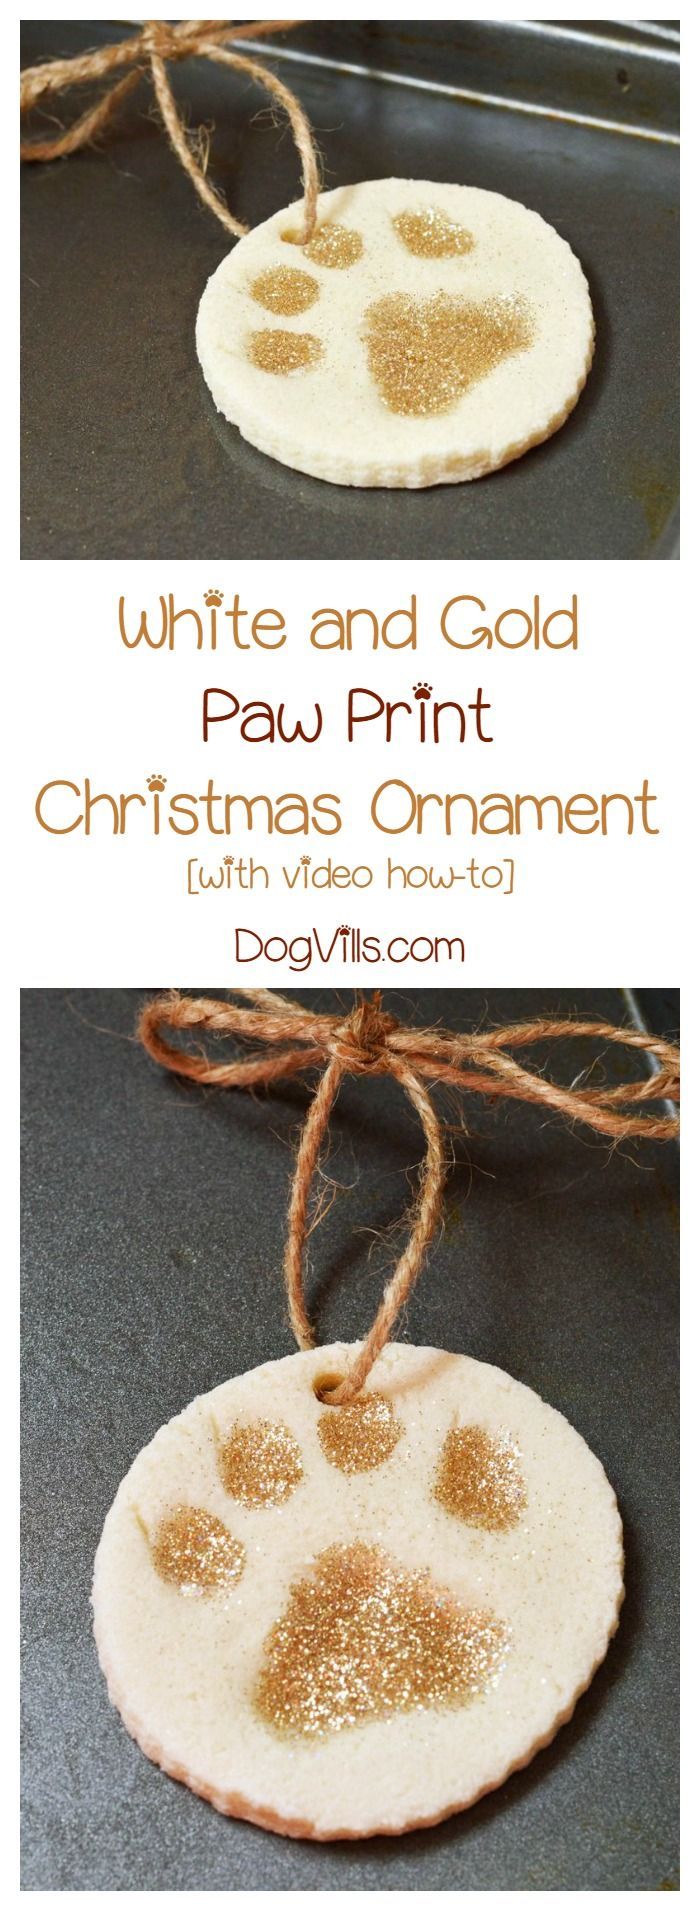 Turn your dogs’ paws into cute Christmas decorations with our paw print Christma